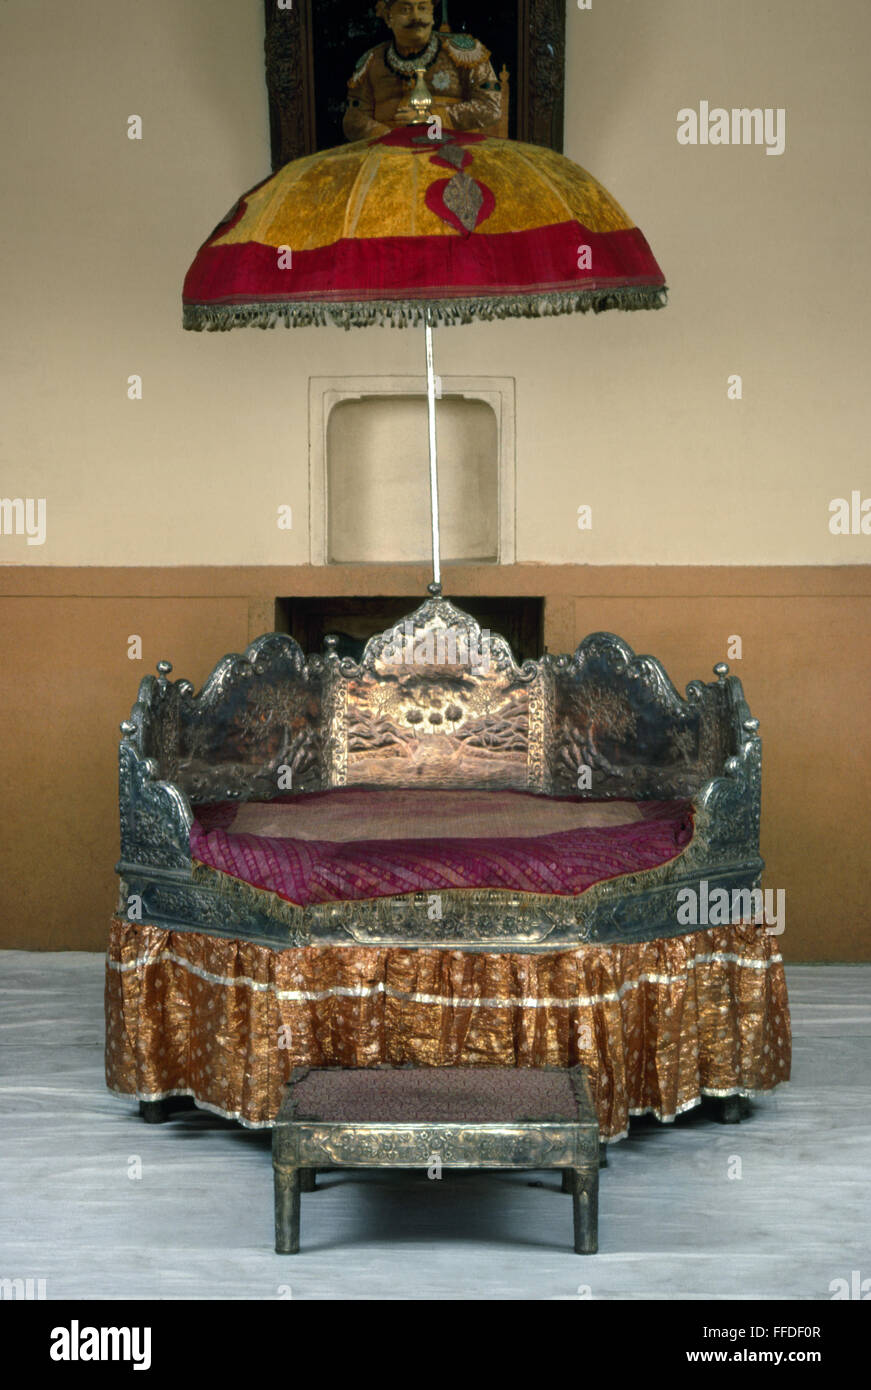 INDIAN FURNITURE. /nA silver and silk seat for a noble of Benares, India, 18th or 19th century. Stock Photo